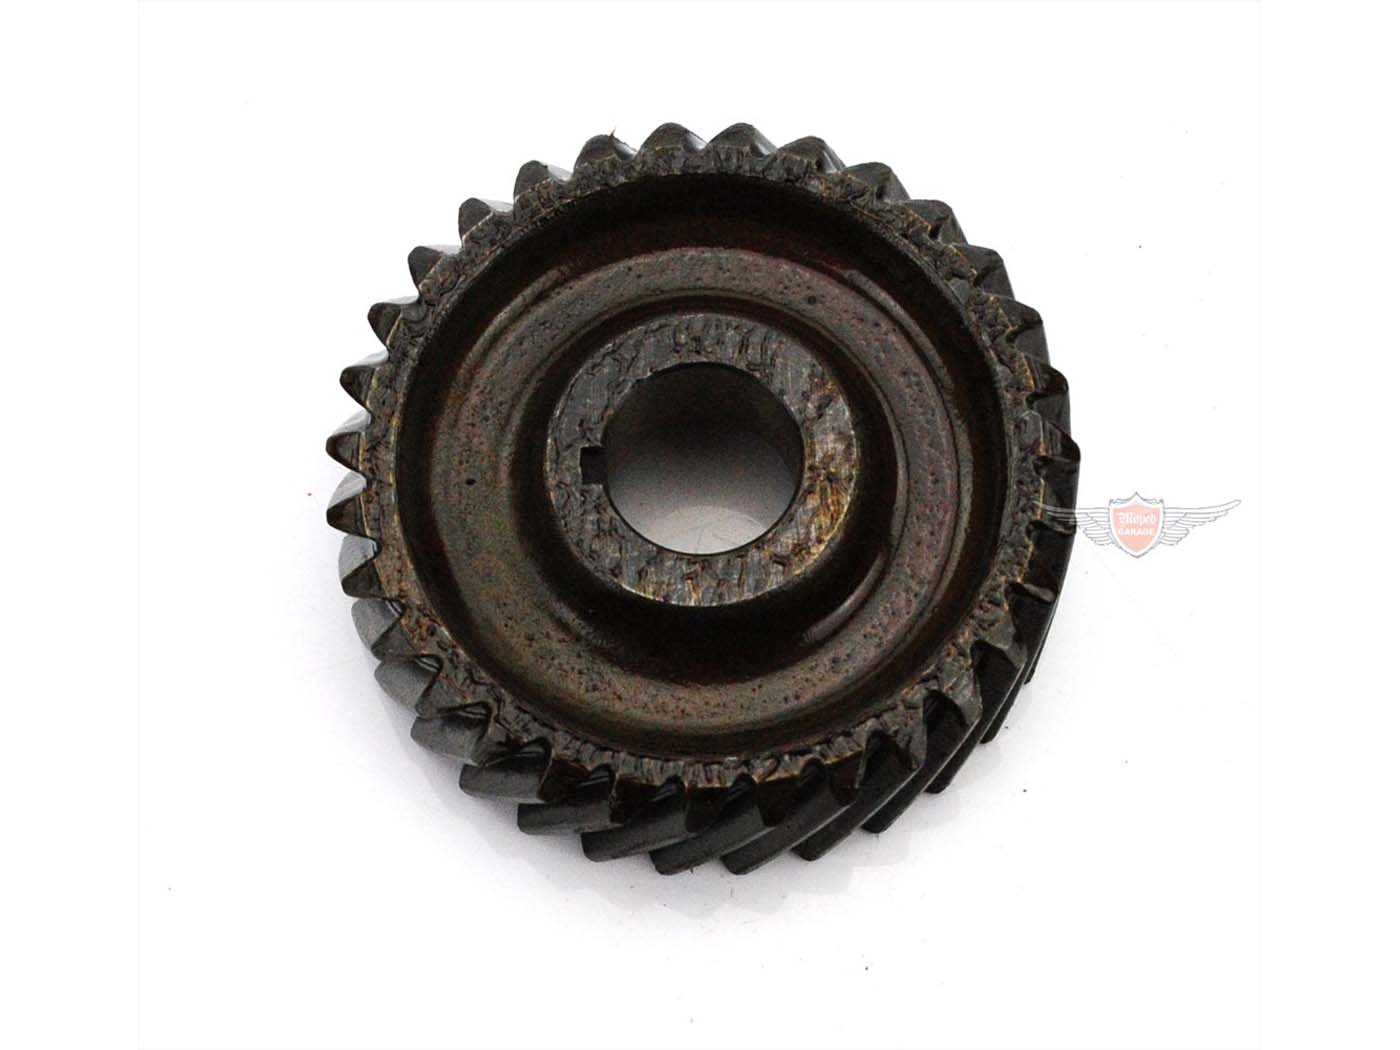 Hercules K 125 BW V1 + 2 Sachs Engine Spur Gear Primary Drive -1792